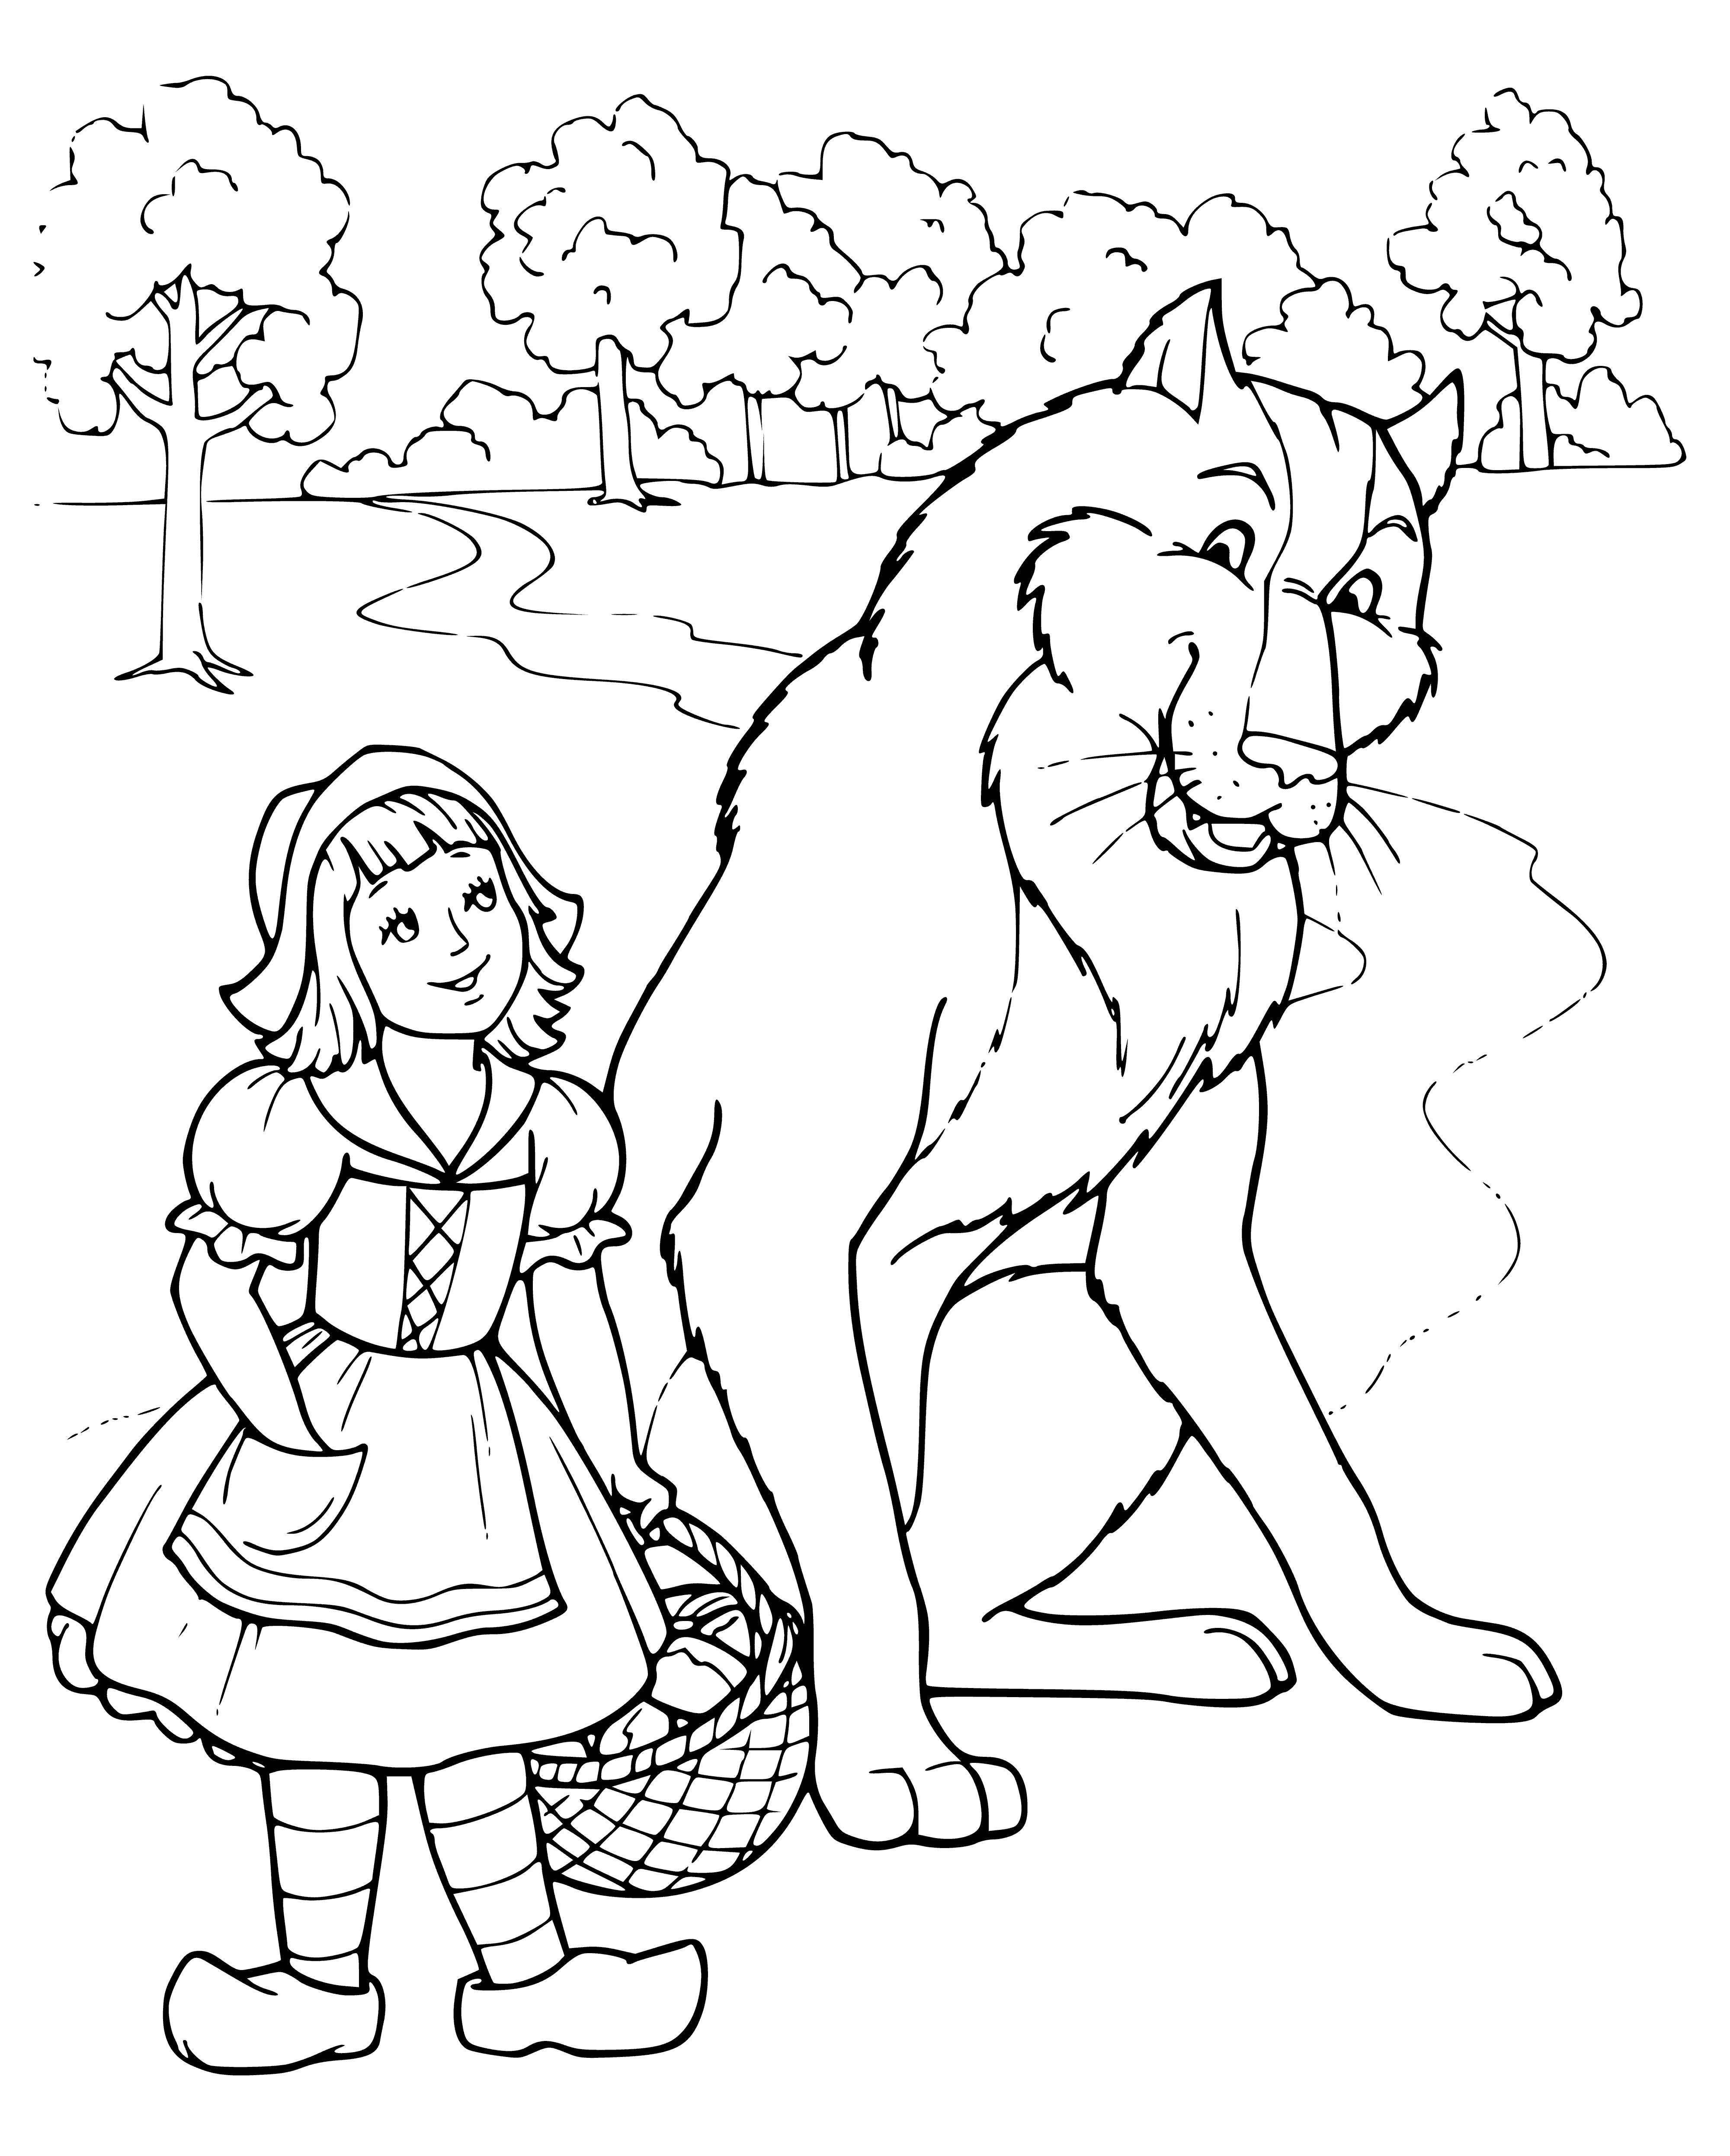 coloring page: Little girl in red cape in forest looks at wolf lying in grass with big mouth & sharp teeth.